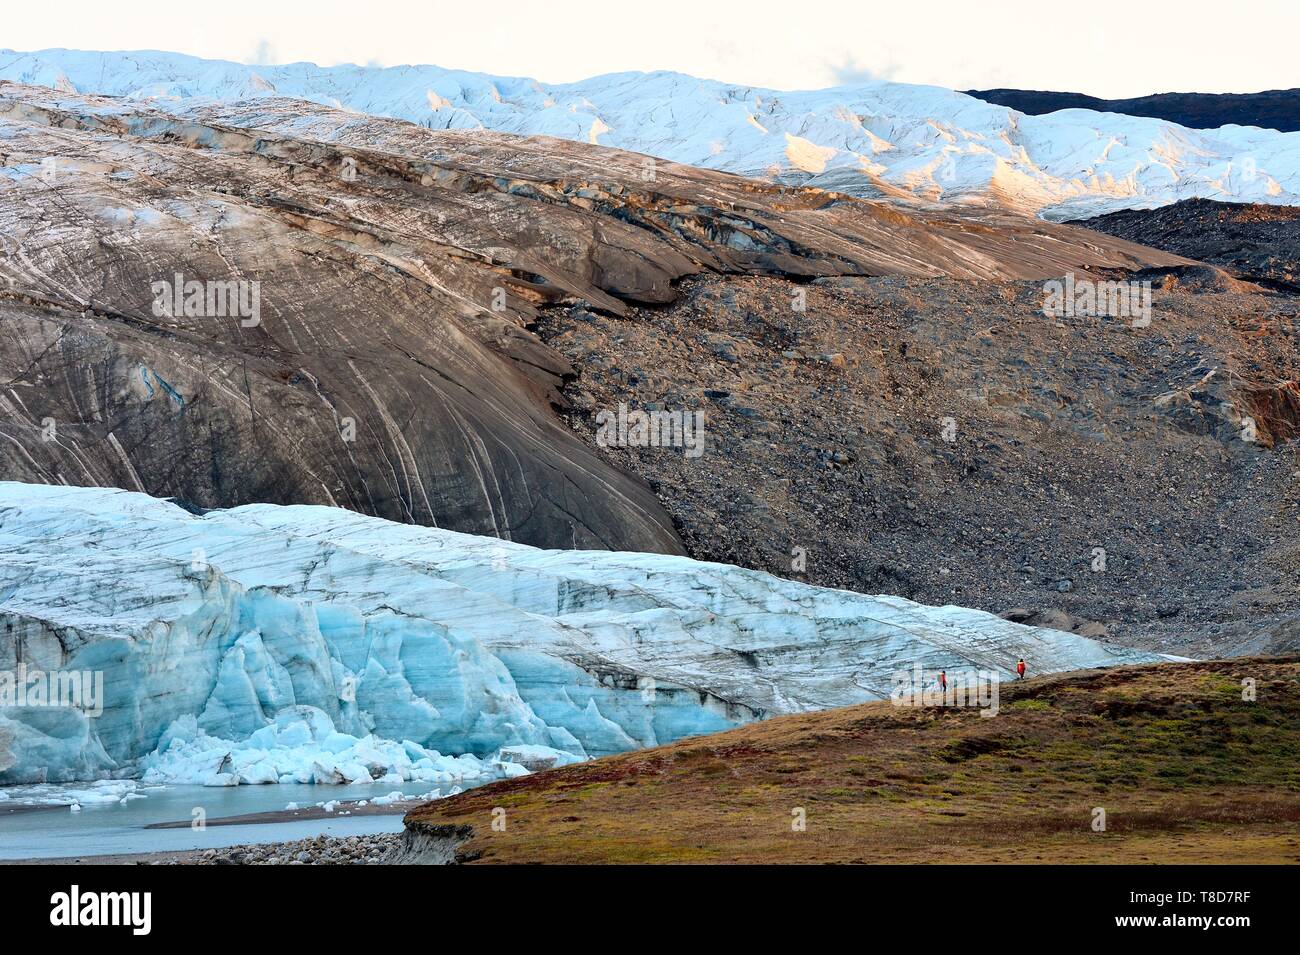 Greenland, central western region towards Kangerlussuaq bay, Isunngua highland, the Reindeer glacier (part of the Russell Glacier) at the edge of the ice cap and located within the UNESCO World Heritage site of Aasivissuit - Nipisat and hiker Stock Photo